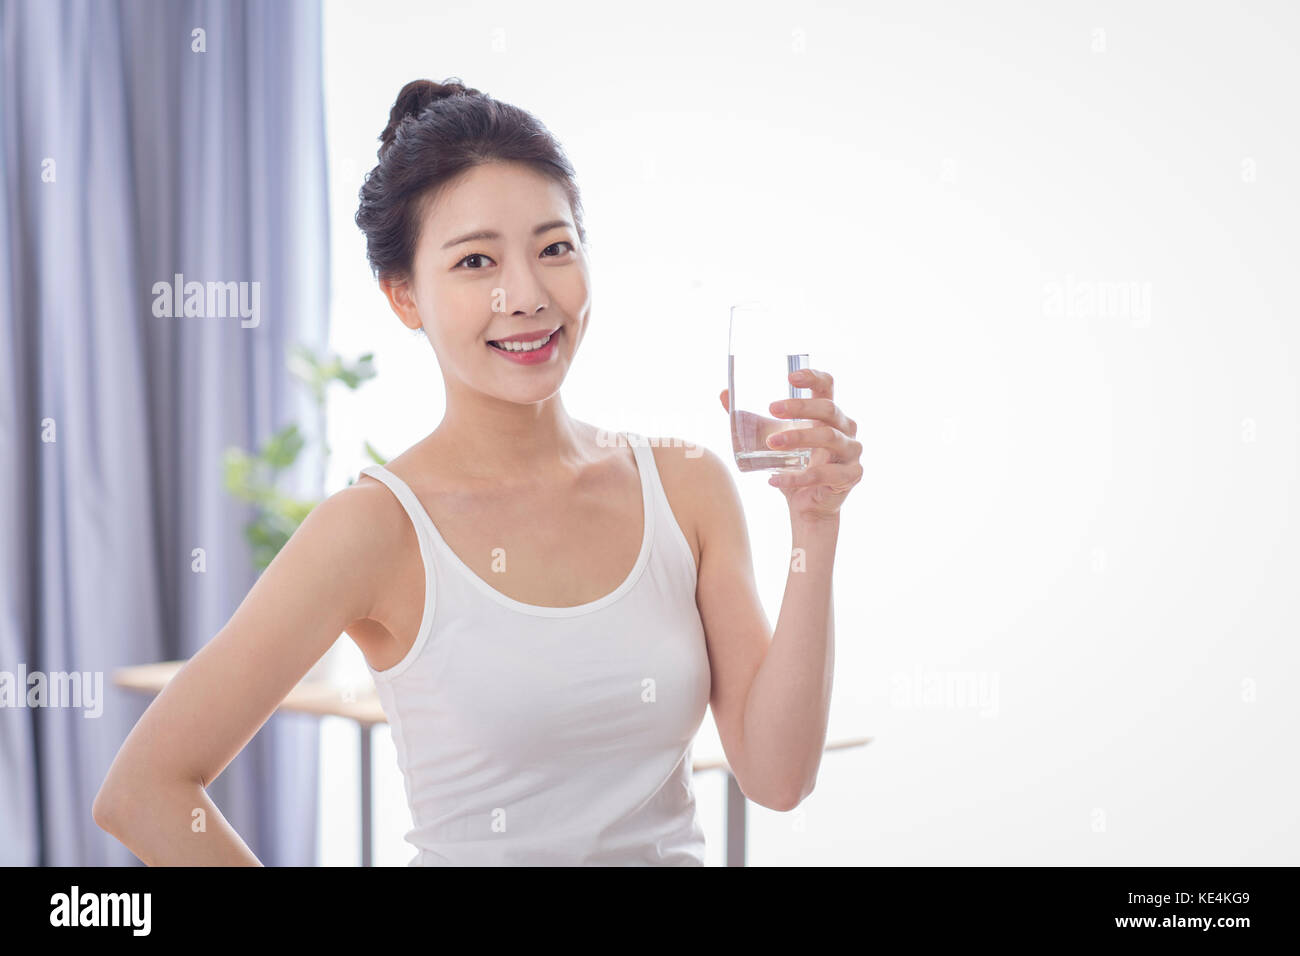 Portrait of young smiling woman with a glass of water posing Stock Photo